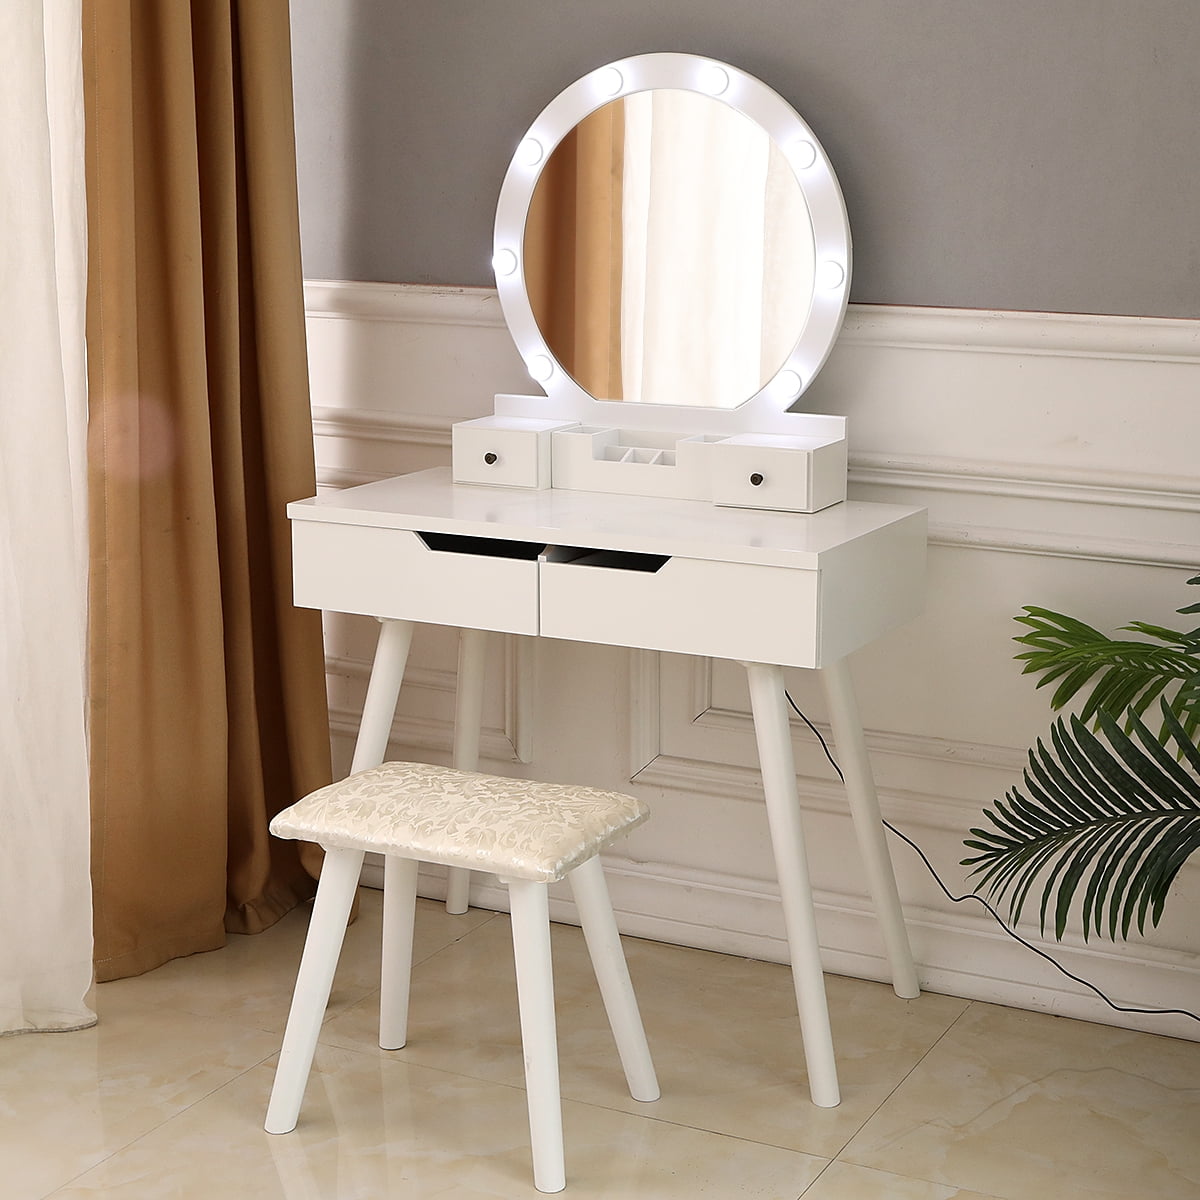 Ktaxon Vanity Set With Round Lighted, White Wooden Dressing Table Mirror With Lights